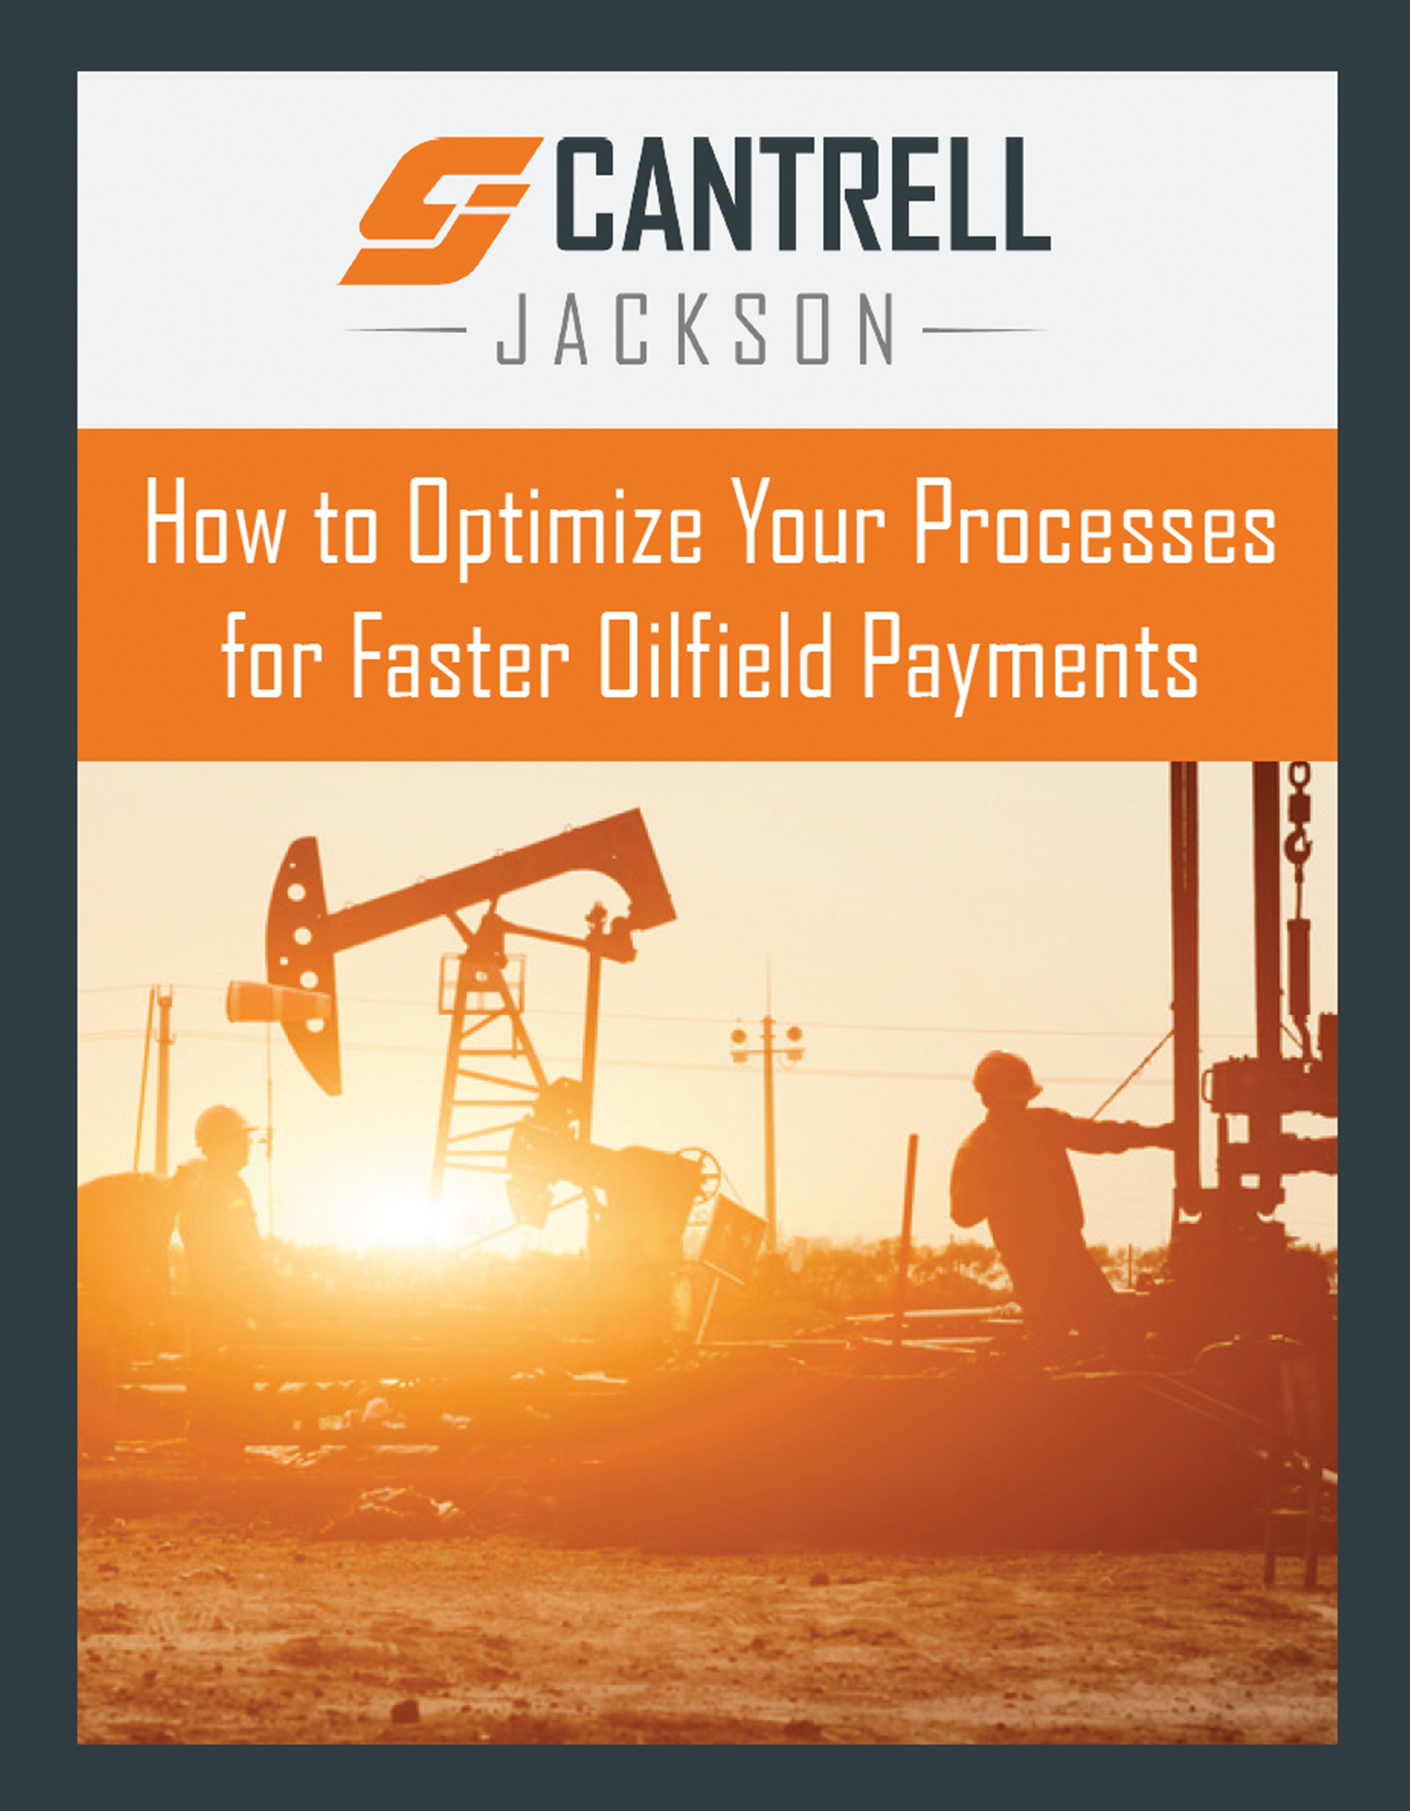 How To Optimize Your Processes for Faster Oilfield Payments